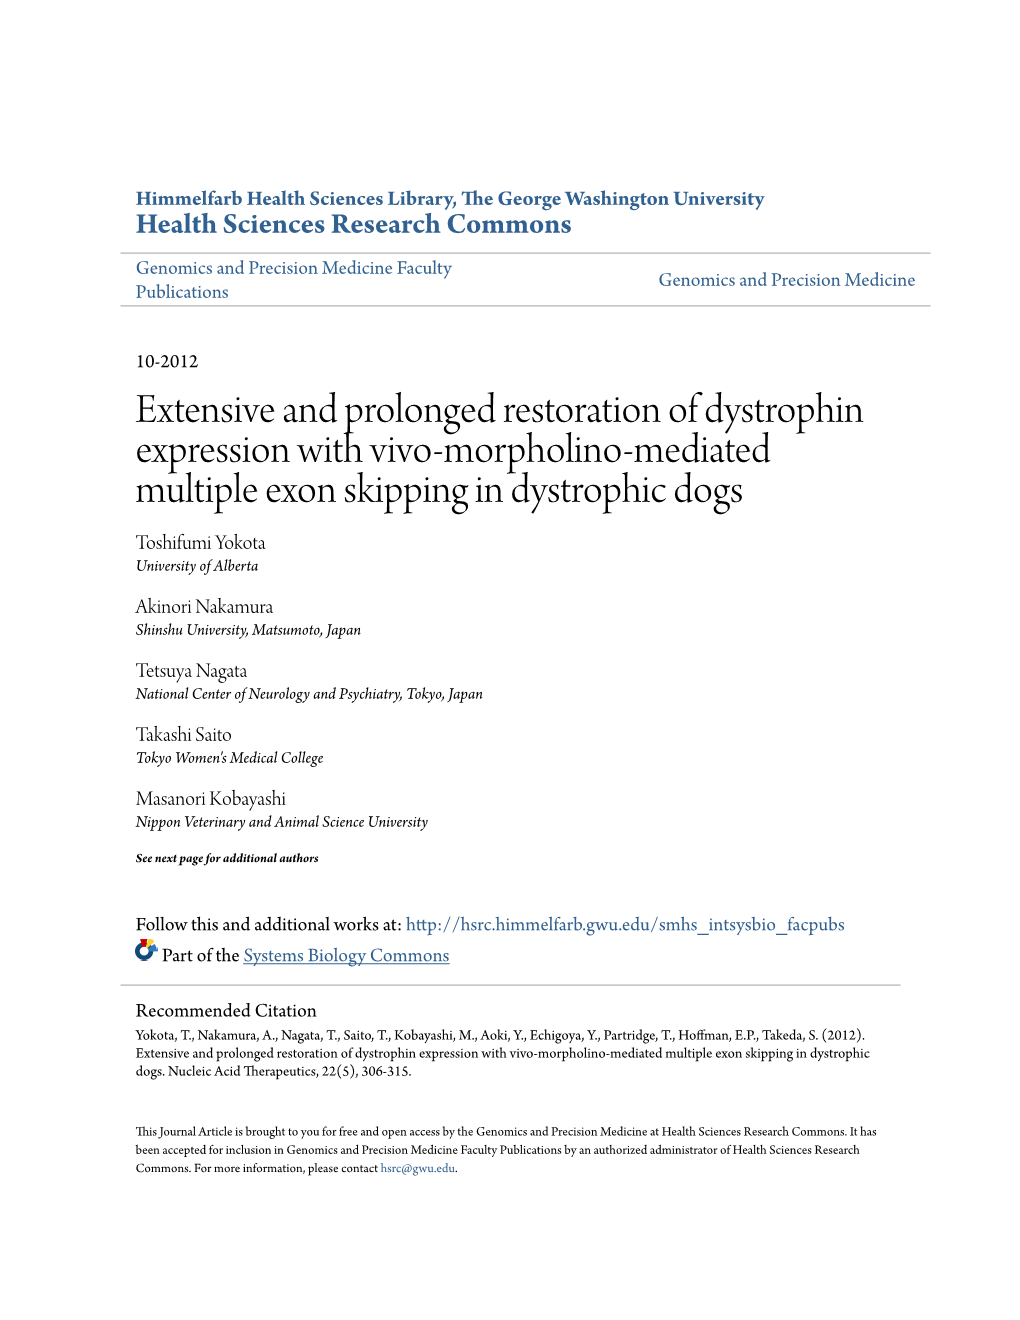 Extensive and Prolonged Restoration of Dystrophin Expression with Vivo